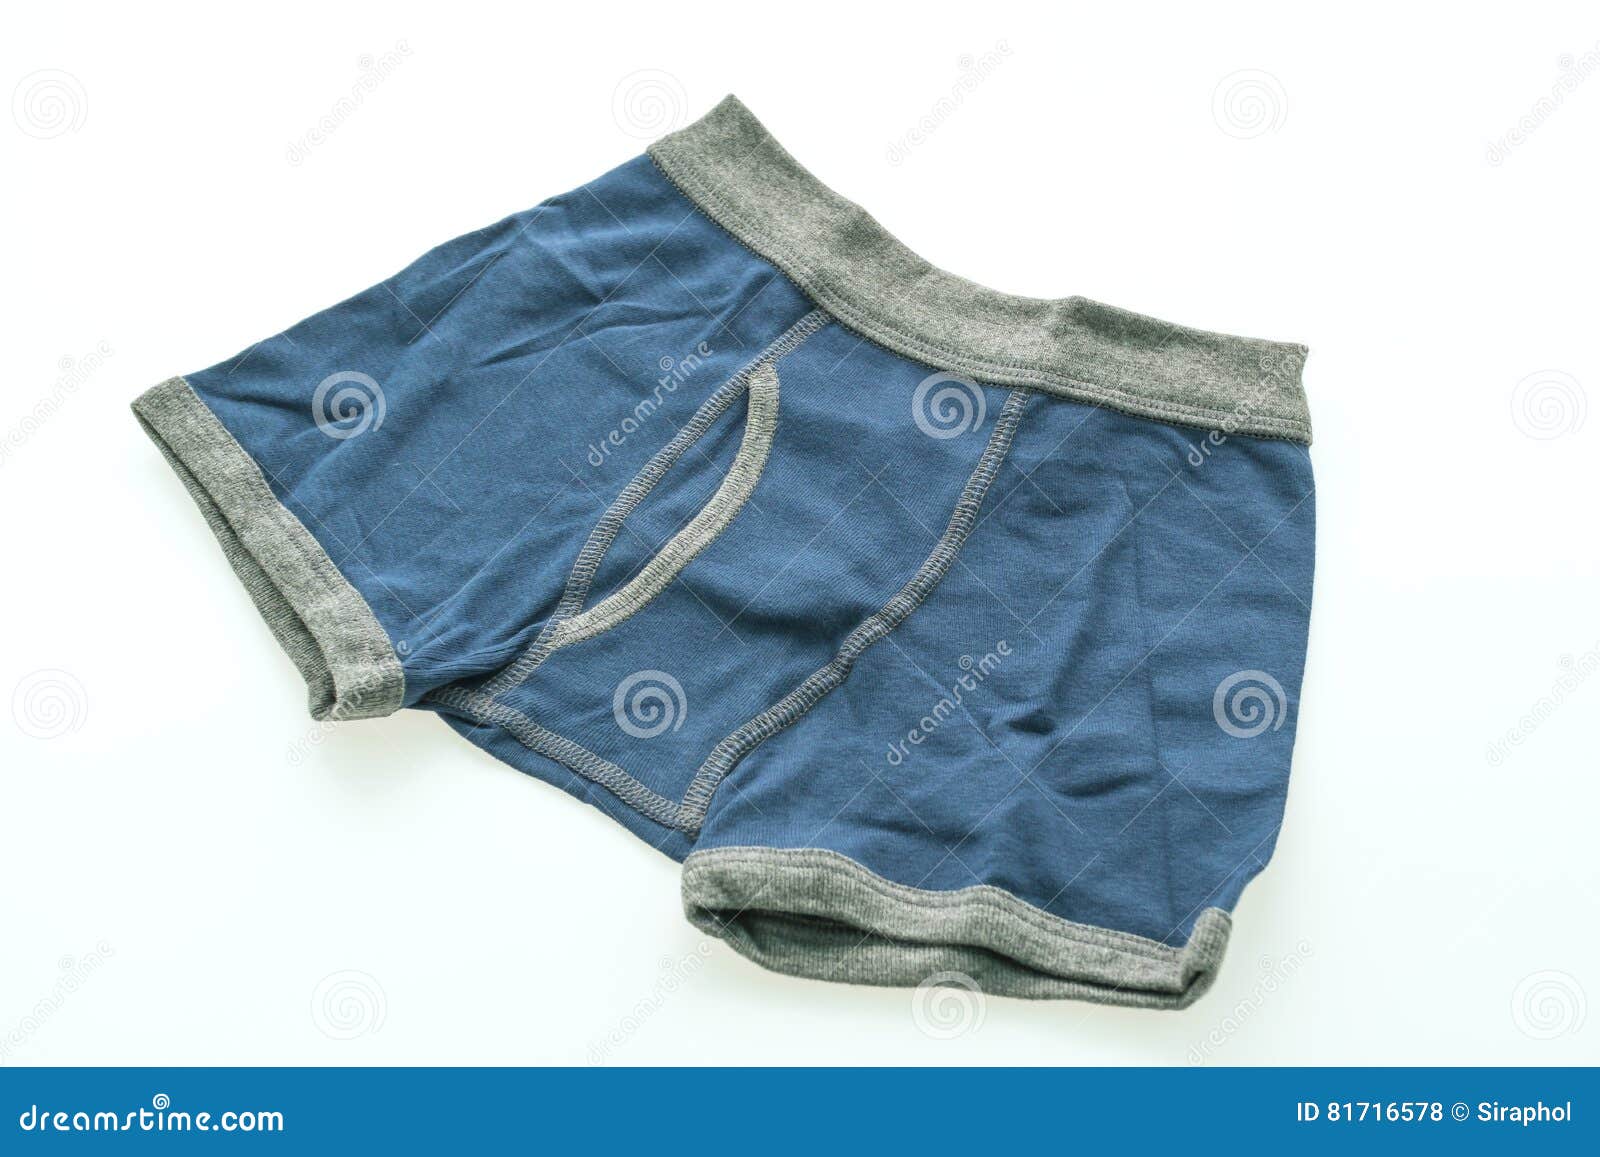 Short Underwear for Kid and Boy Stock Photo - Image of kids, isolated ...